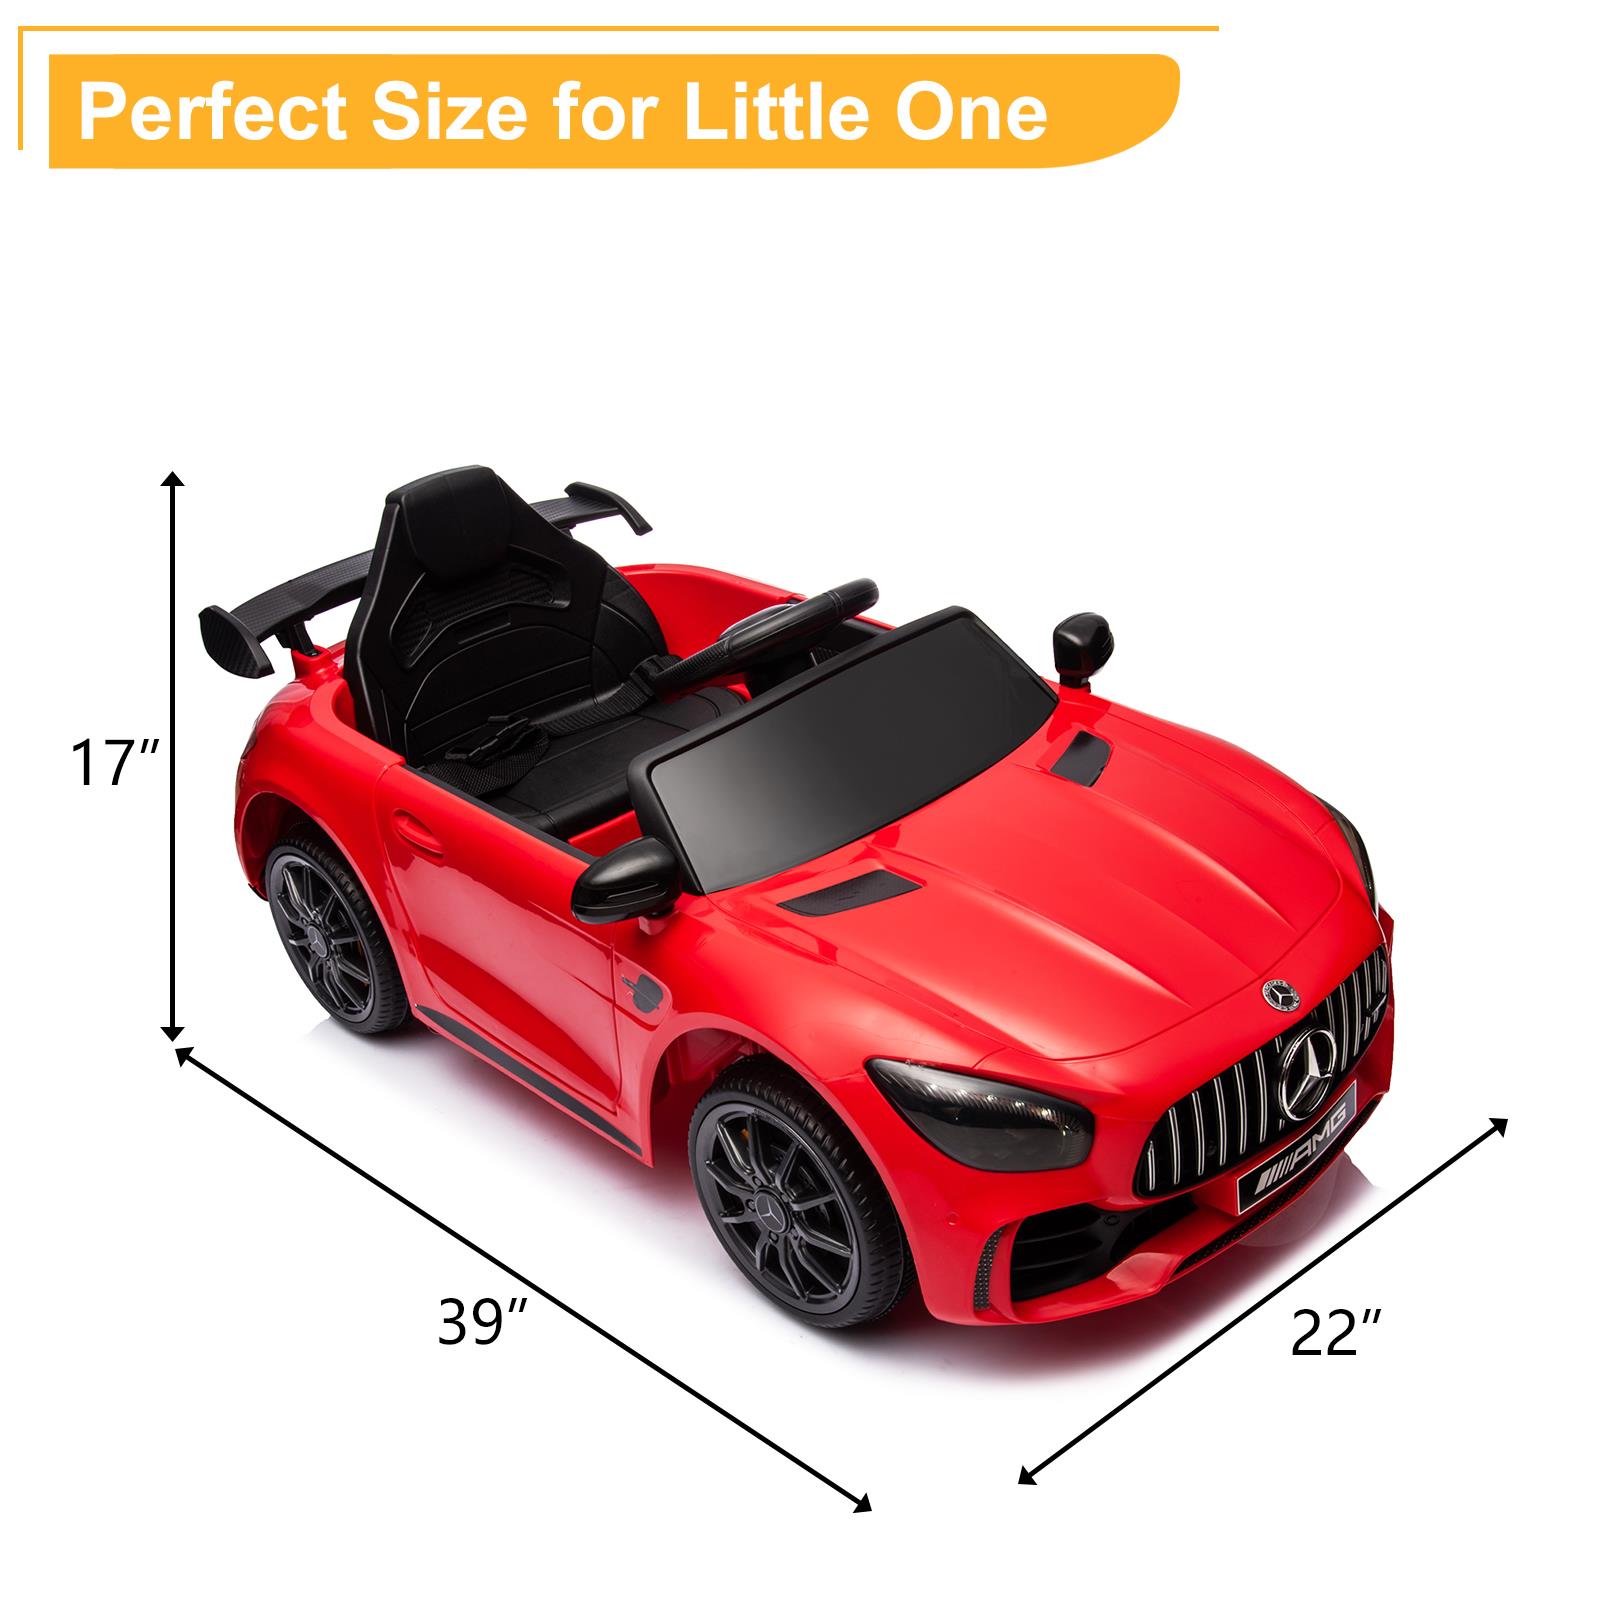 UBesGoo 12V Licensed Mercedes-Benz Electric Ride on Car Toy for Toddler Kid w/ Remote Control, LED Lights, Red - image 3 of 11